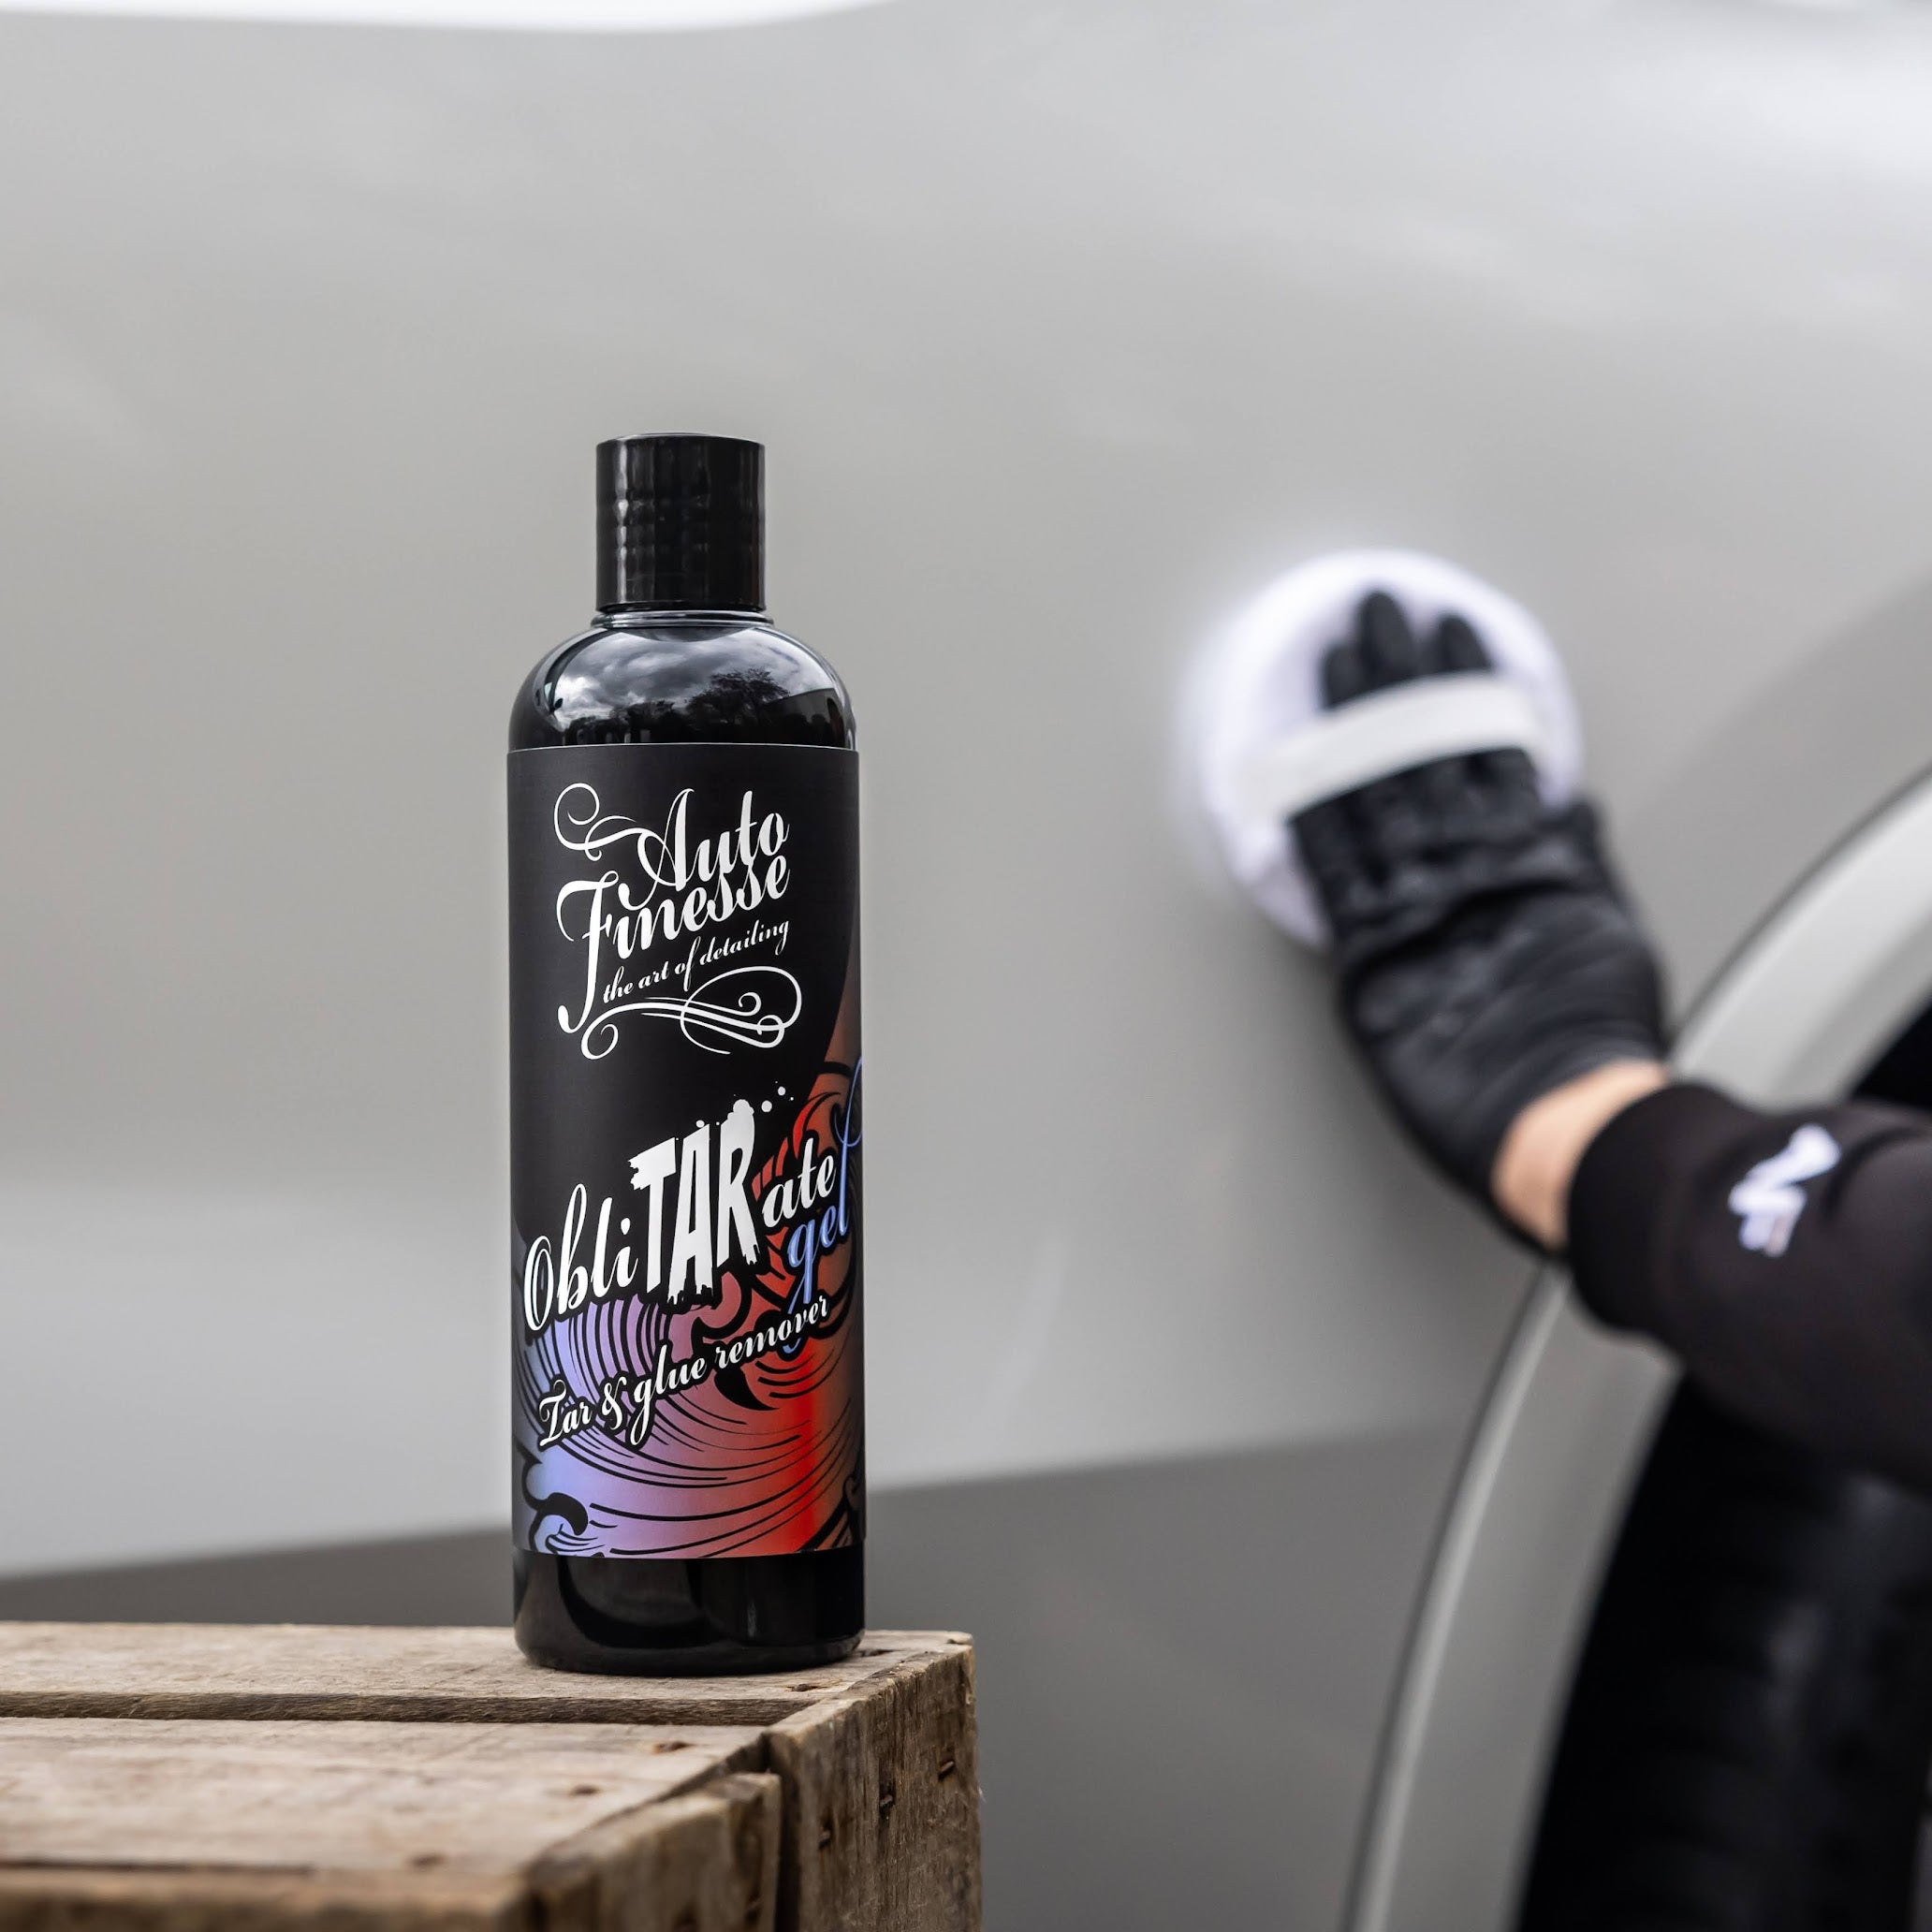 Auto Finesse | Car Detailing Products | ObliTARate Gel